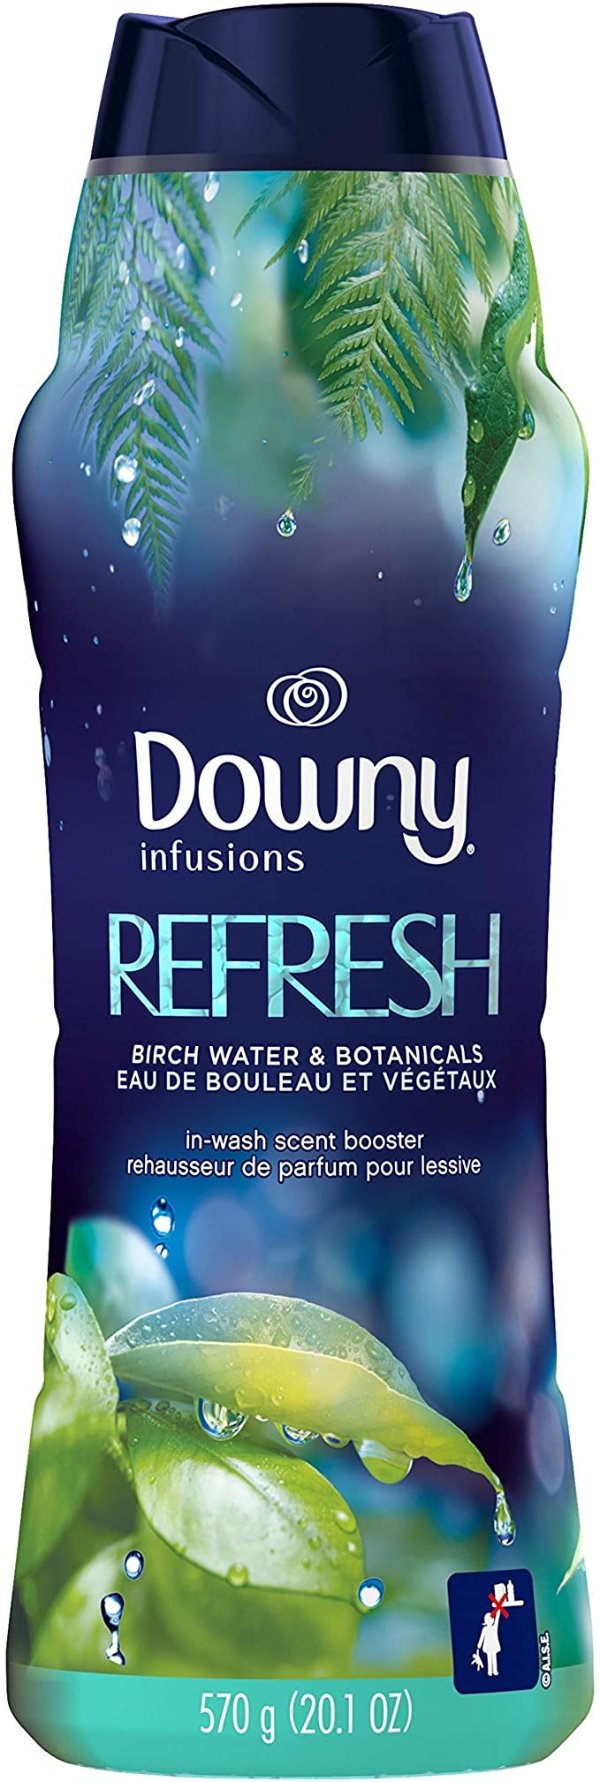 Infusions in-Wash Scent Booster Beads, Refresh, Birch Water & Botanicals, 20.1 Oz, Pack of 1